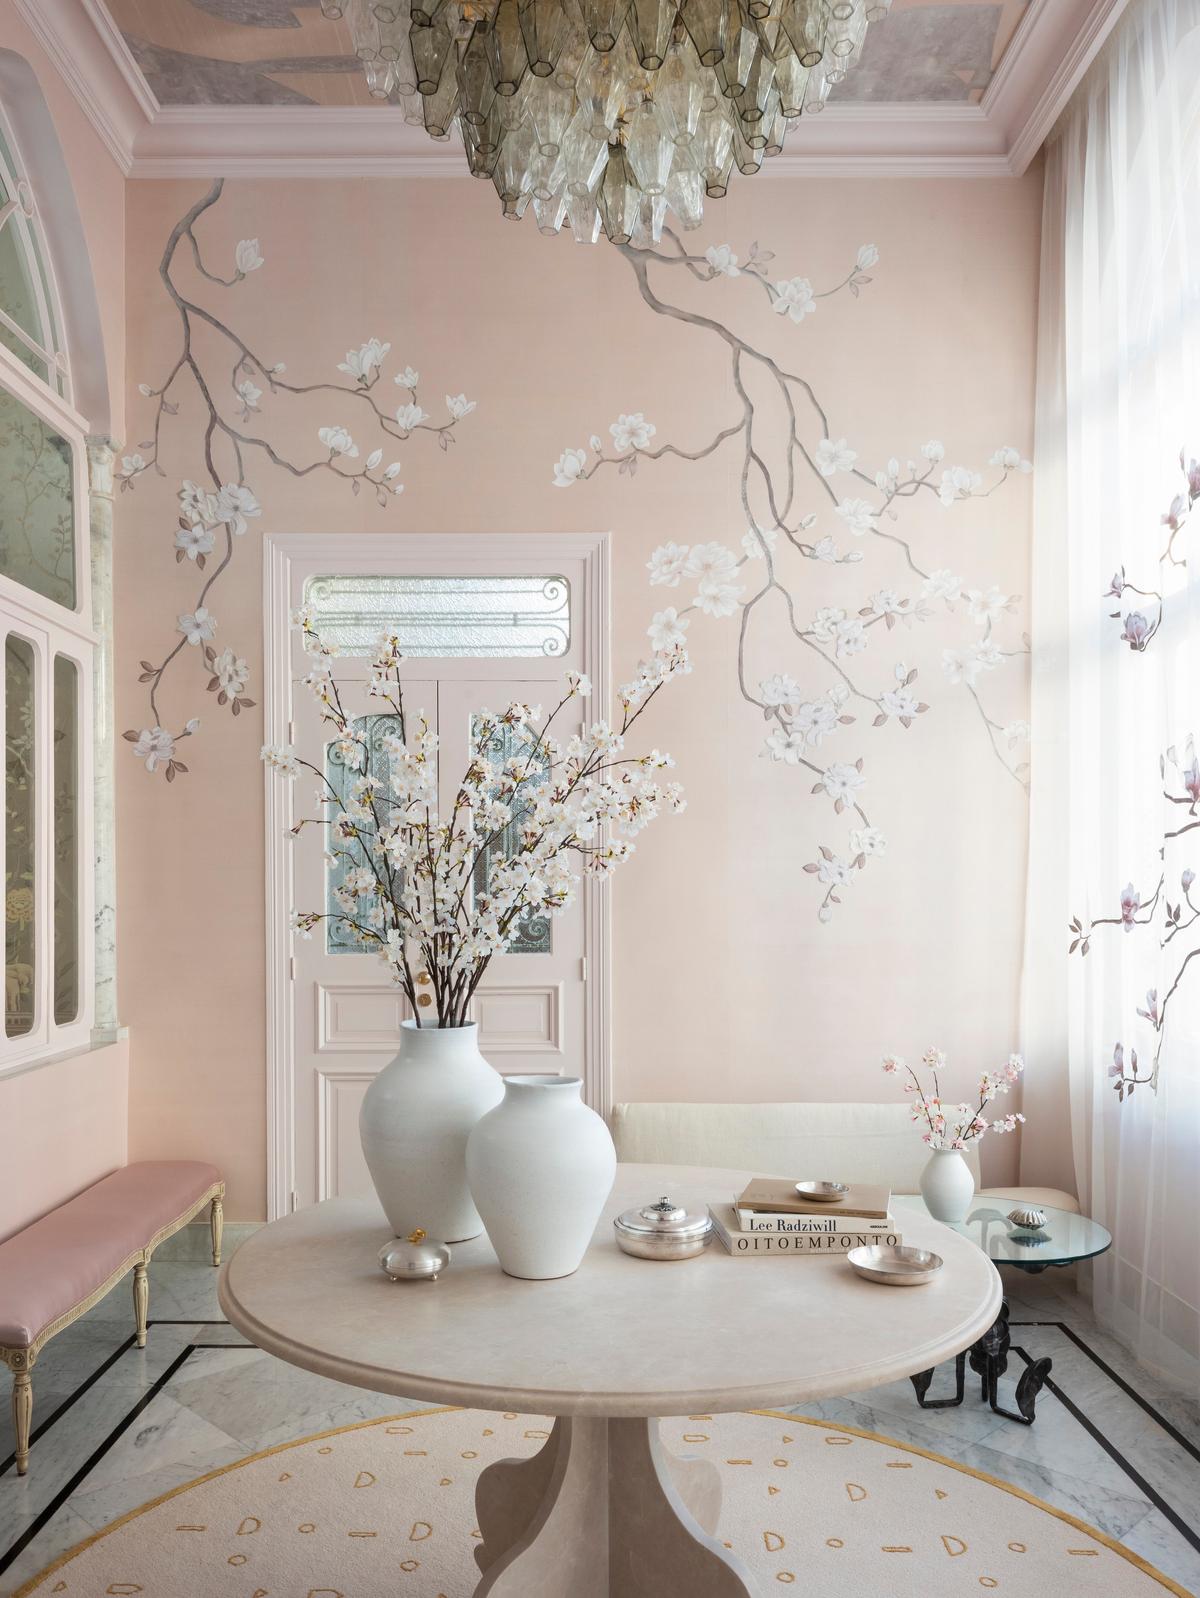 Delicate magnolia branches ("Magnolia Canopy") greet guests at de Gournay's showroom in Beirut, Lebanon. (Rebecca Reid)